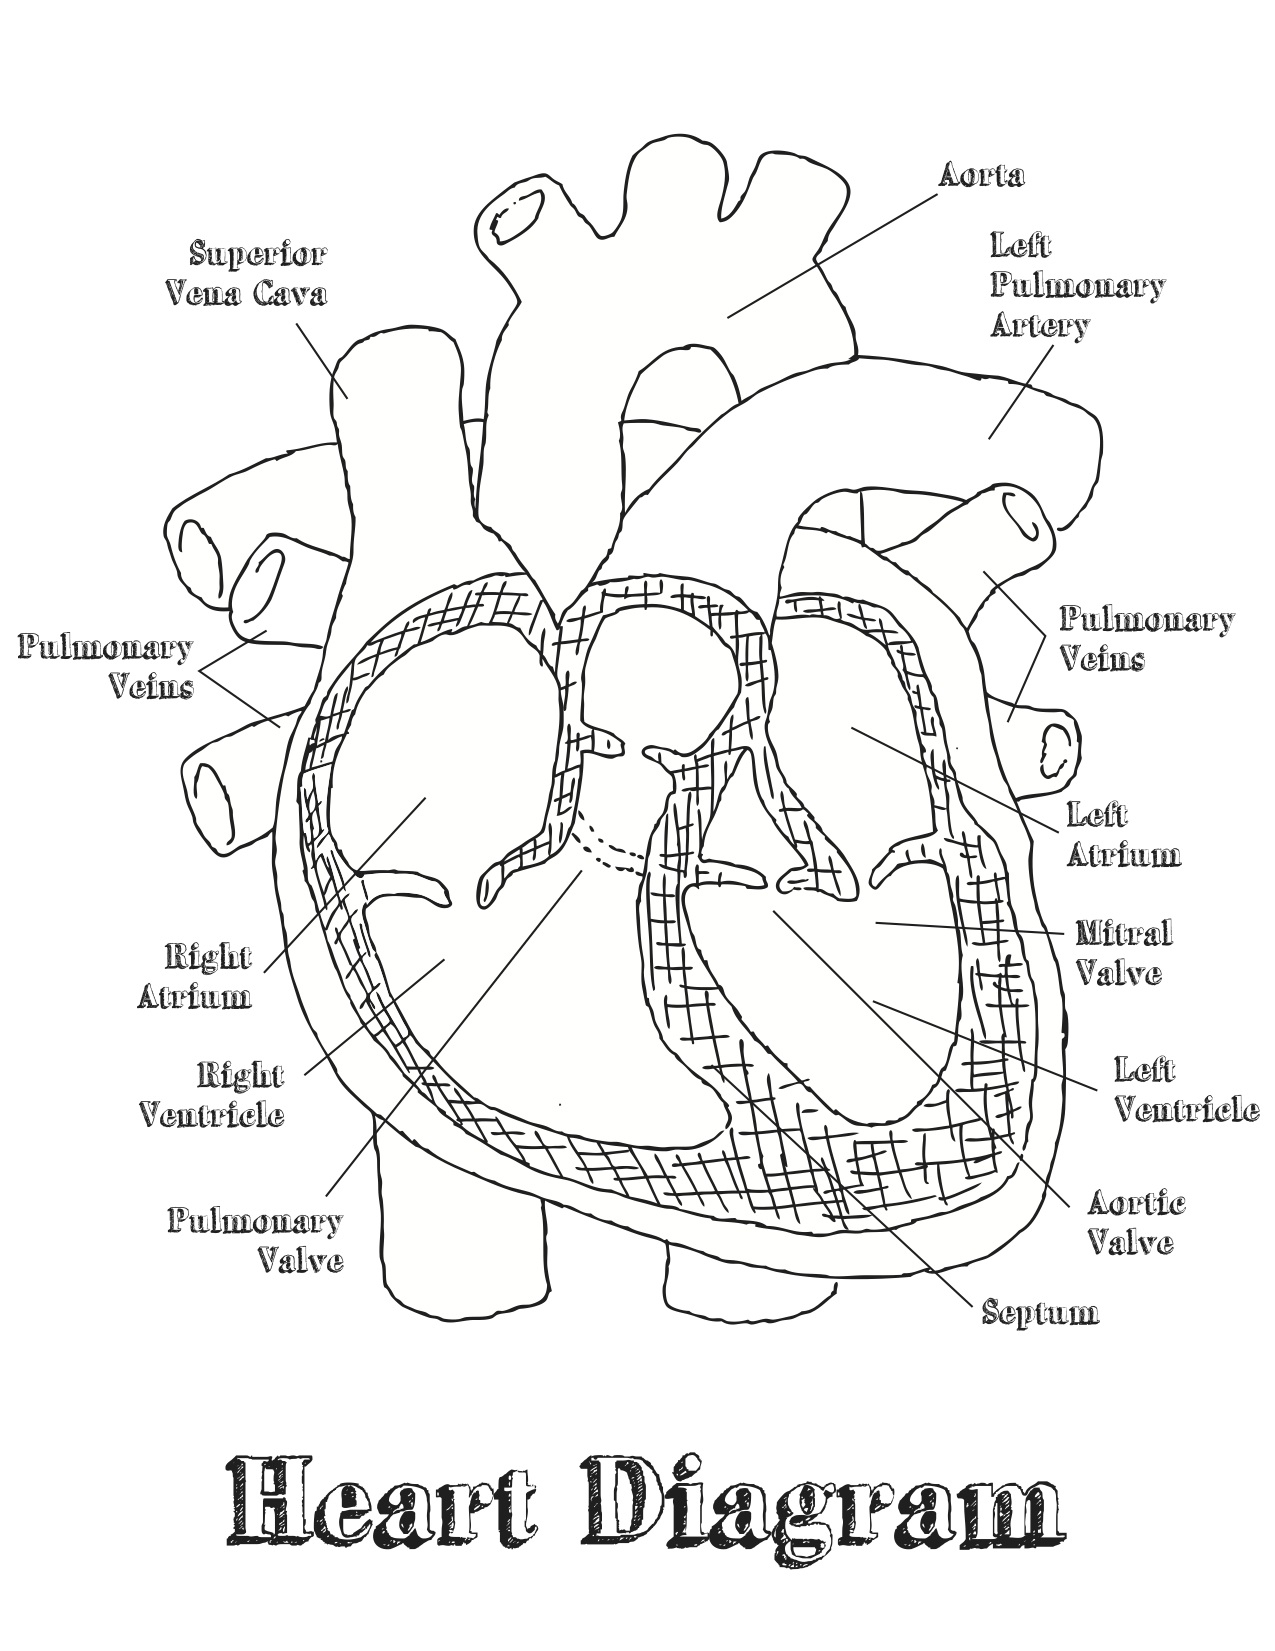 Heart Diagram Coloring Page at GetColorings.com | Free ...